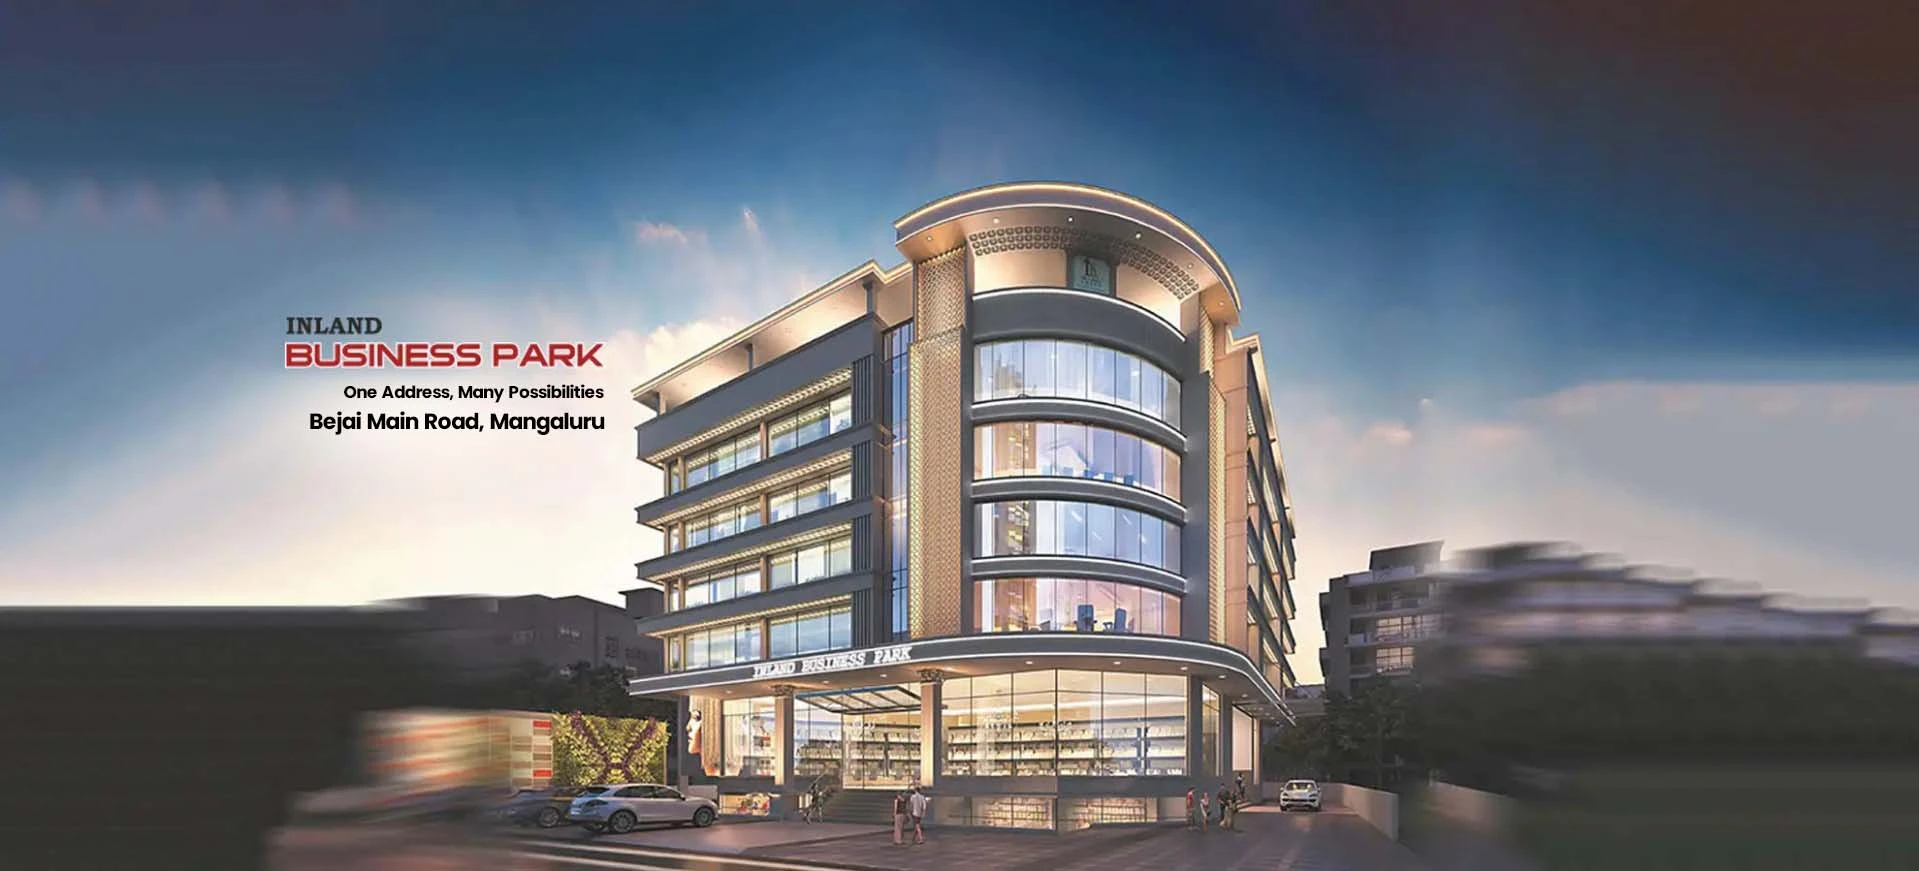 IN-LAND Business Park- New Commercial Complex Project in Mangalore